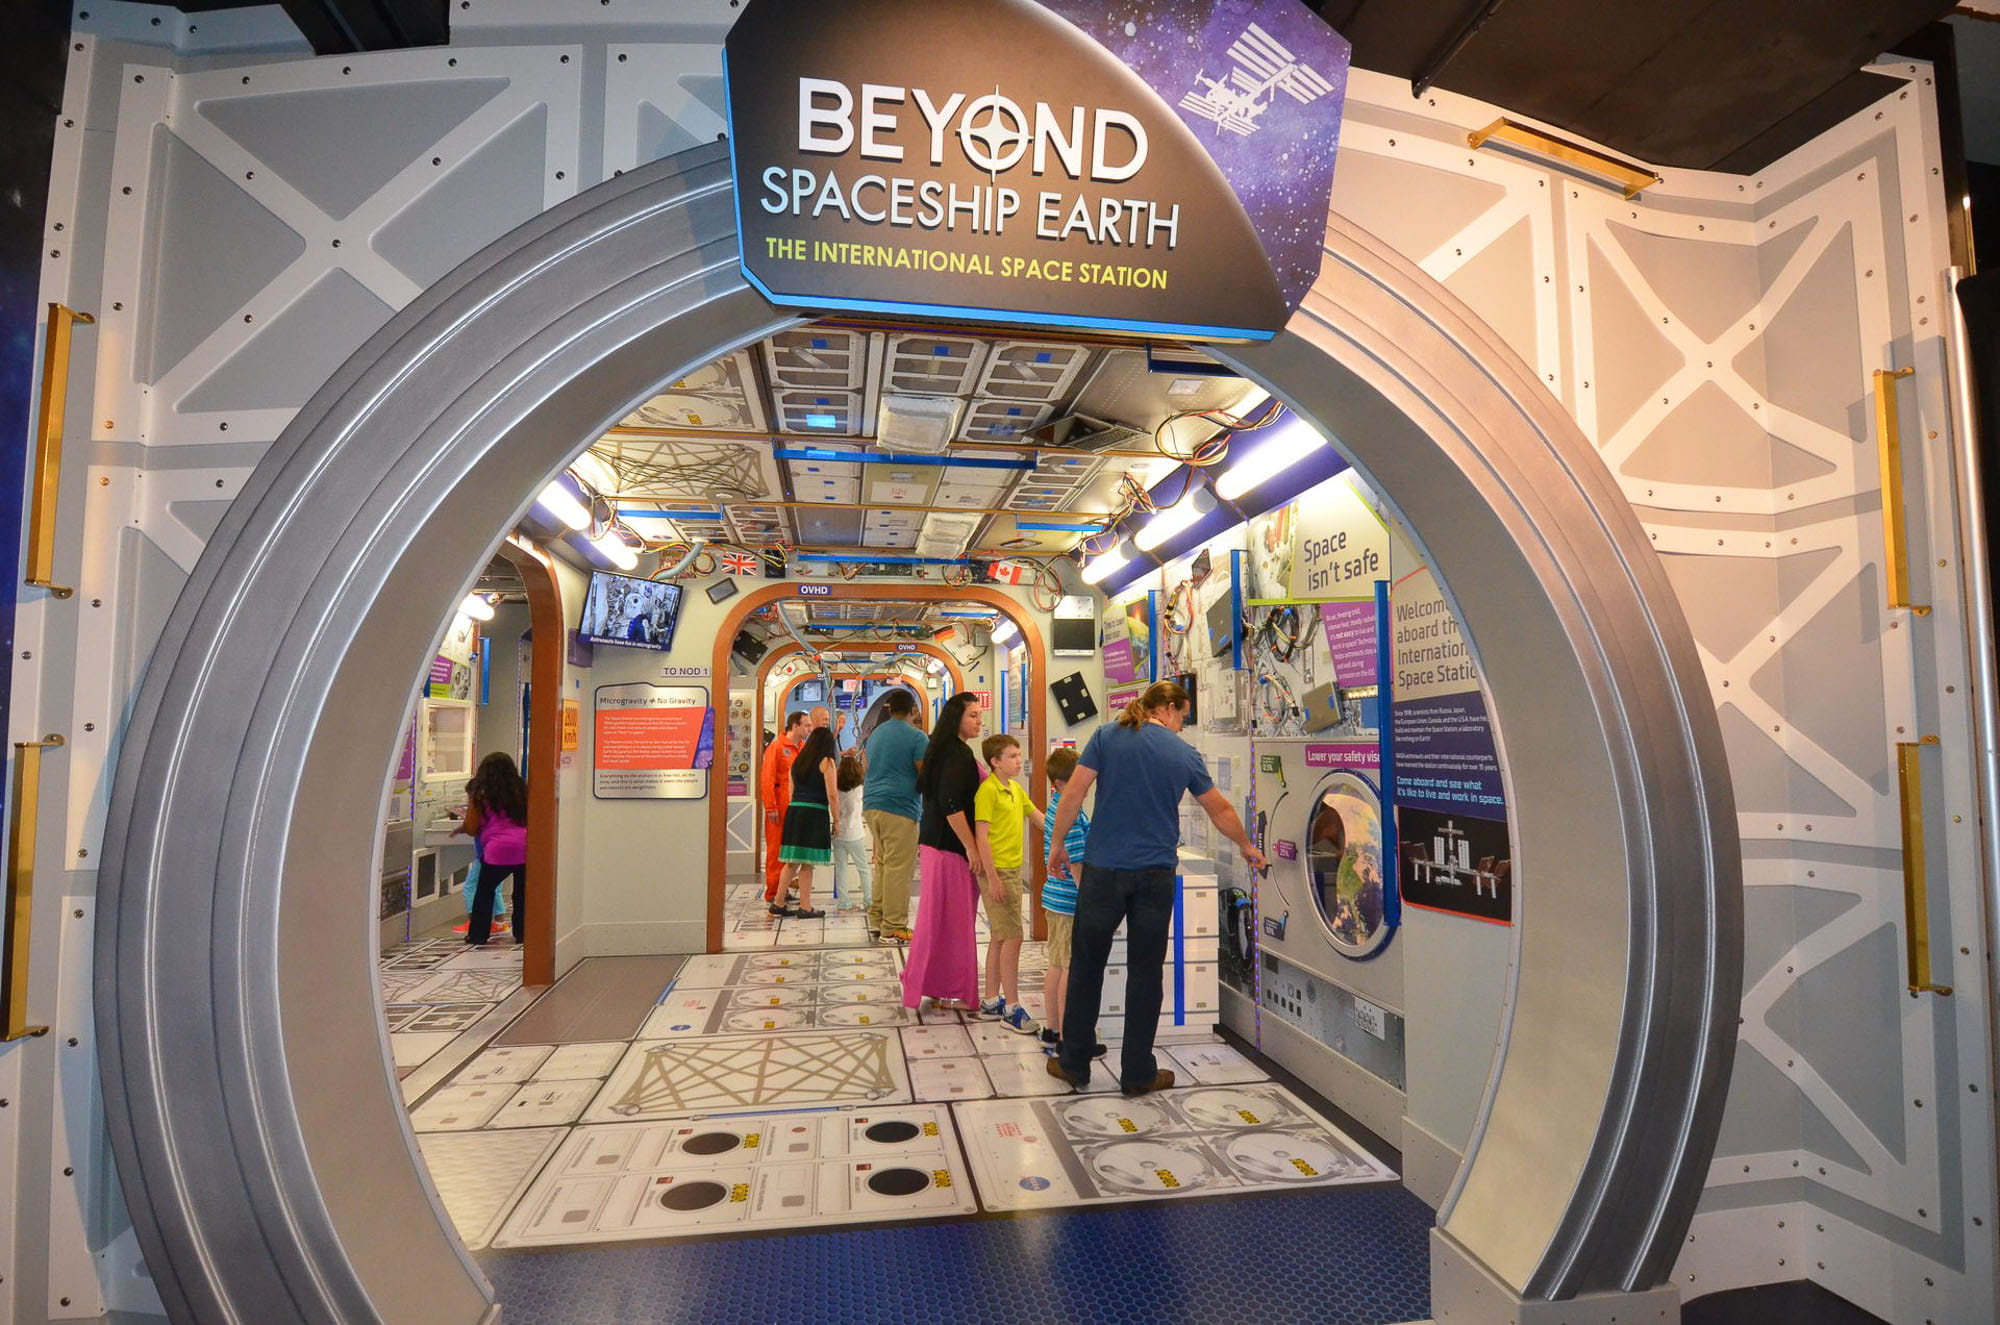 Childrens-Museum-Indianapolis-Beyond-Spaceship-Earth-003-large